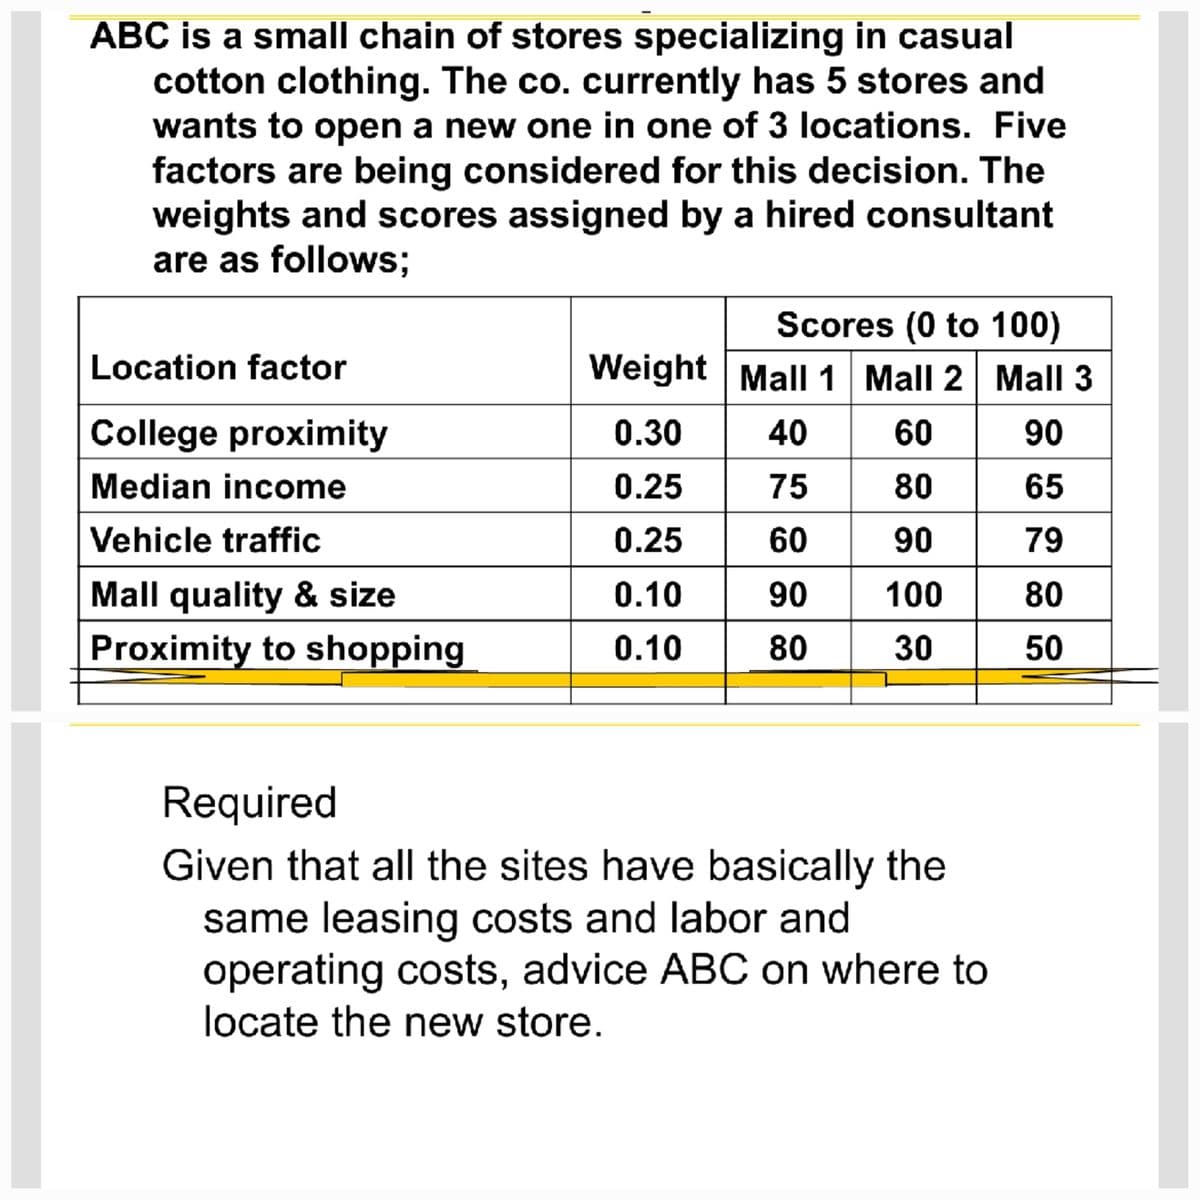 ABC is a small chain of stores specializing in casual
cotton clothing. The co. currently has 5 stores and
wants to open a new one in one of 3 locations. Five
factors are being considered for this decision. The
weights and scores assigned by a hired consultant
are as follows;
Location factor
College proximity
Median income
Vehicle traffic
Mall quality & size
Proximity to shopping
Weight
0.30
0.25
0.25
0.10
0.10
Scores (0 to 100)
Mall 1 Mall 2 Mall 3
90
65
79
80
50
40 60
75 80
60
90
90
100
80
30
Required
Given that all the sites have basically the
same leasing costs and labor and
operating costs, advice ABC on where to
locate the new store.